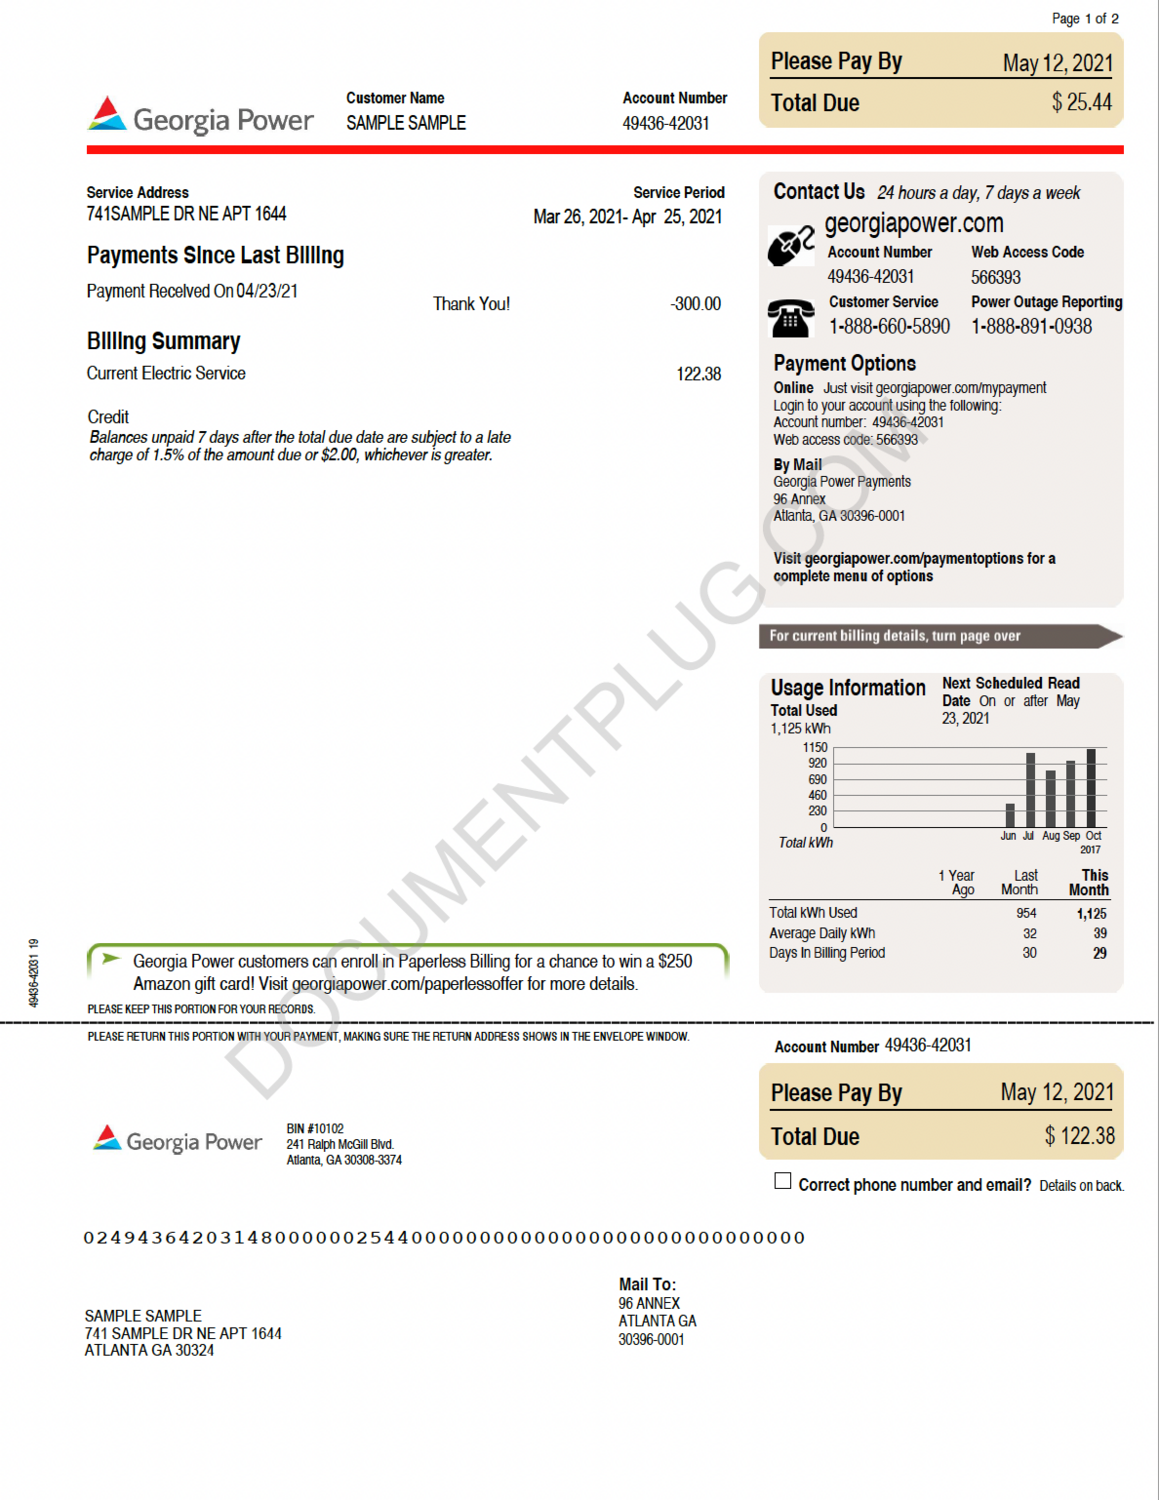 Utility Bill - Multiple companies to select from